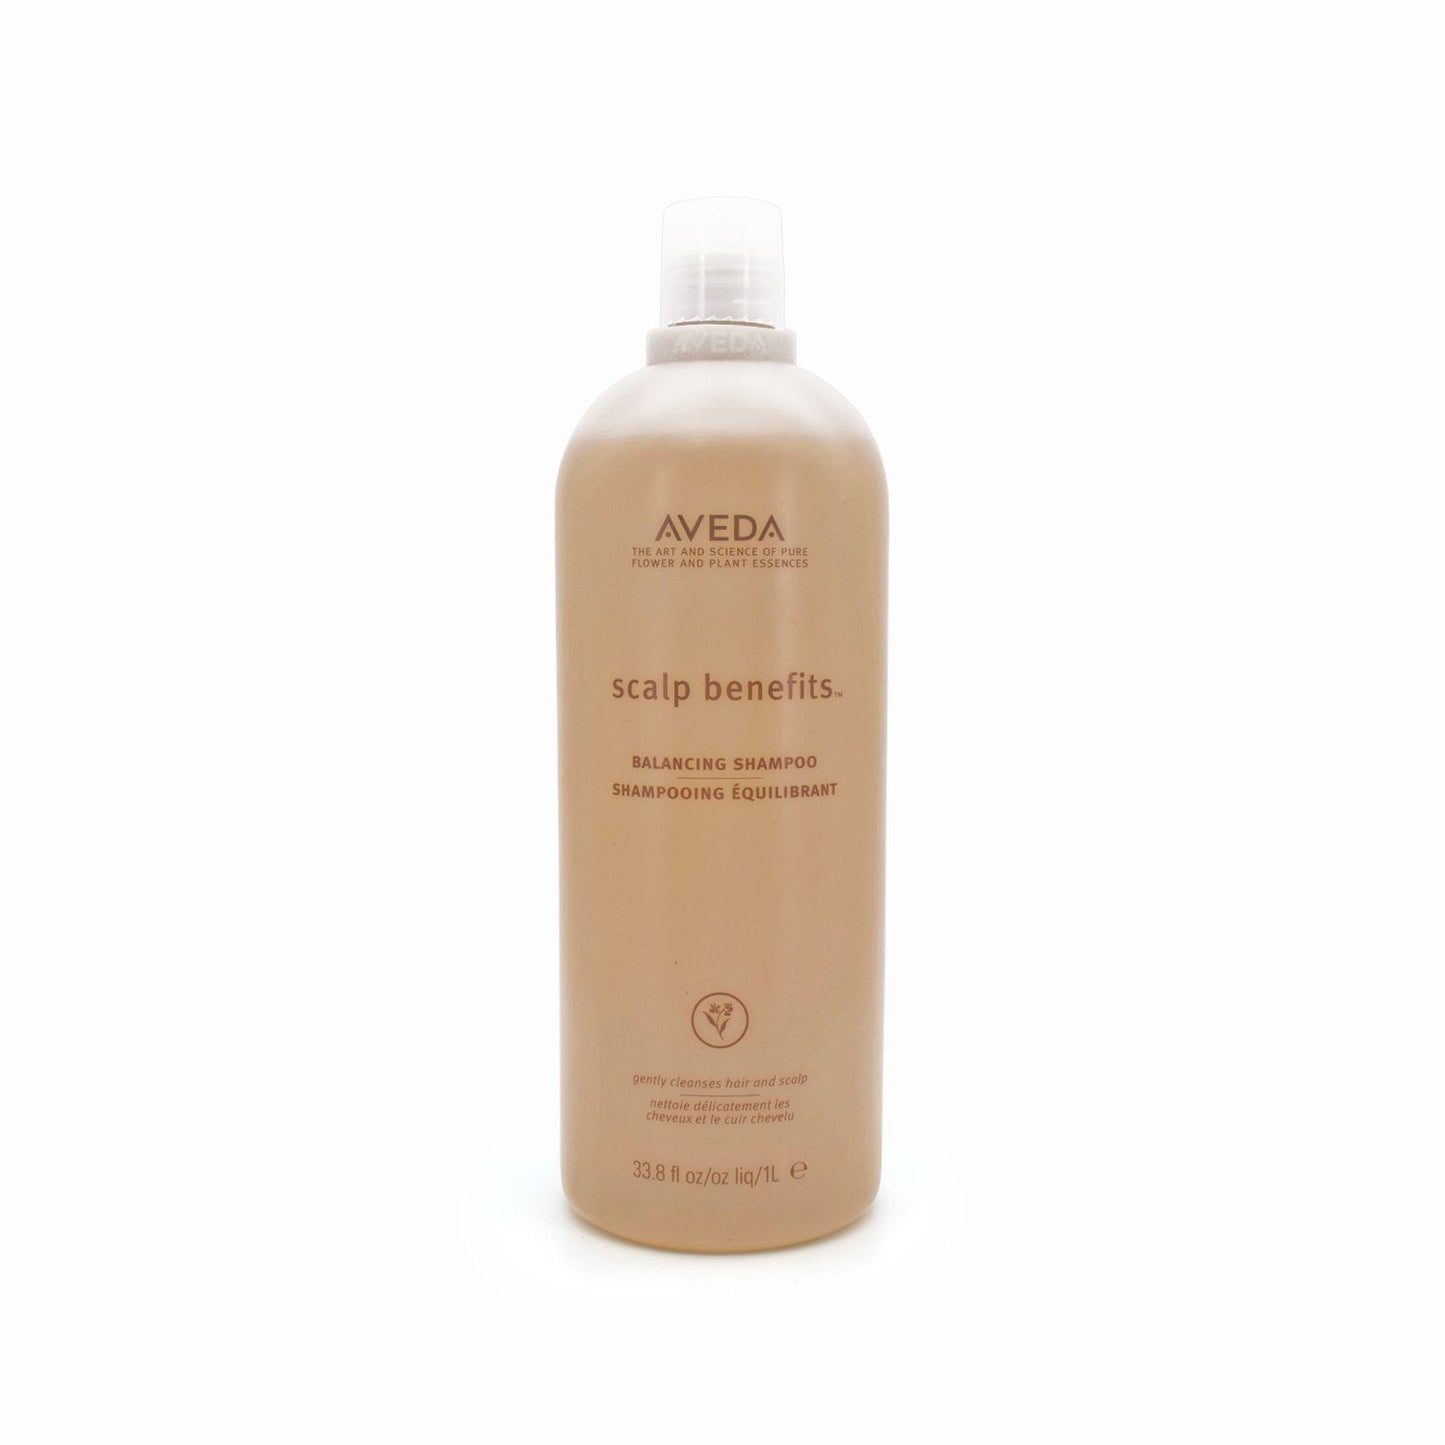 Aveda Scalp Benefits Balancing Shampoo 1000ml - Imperfect Container